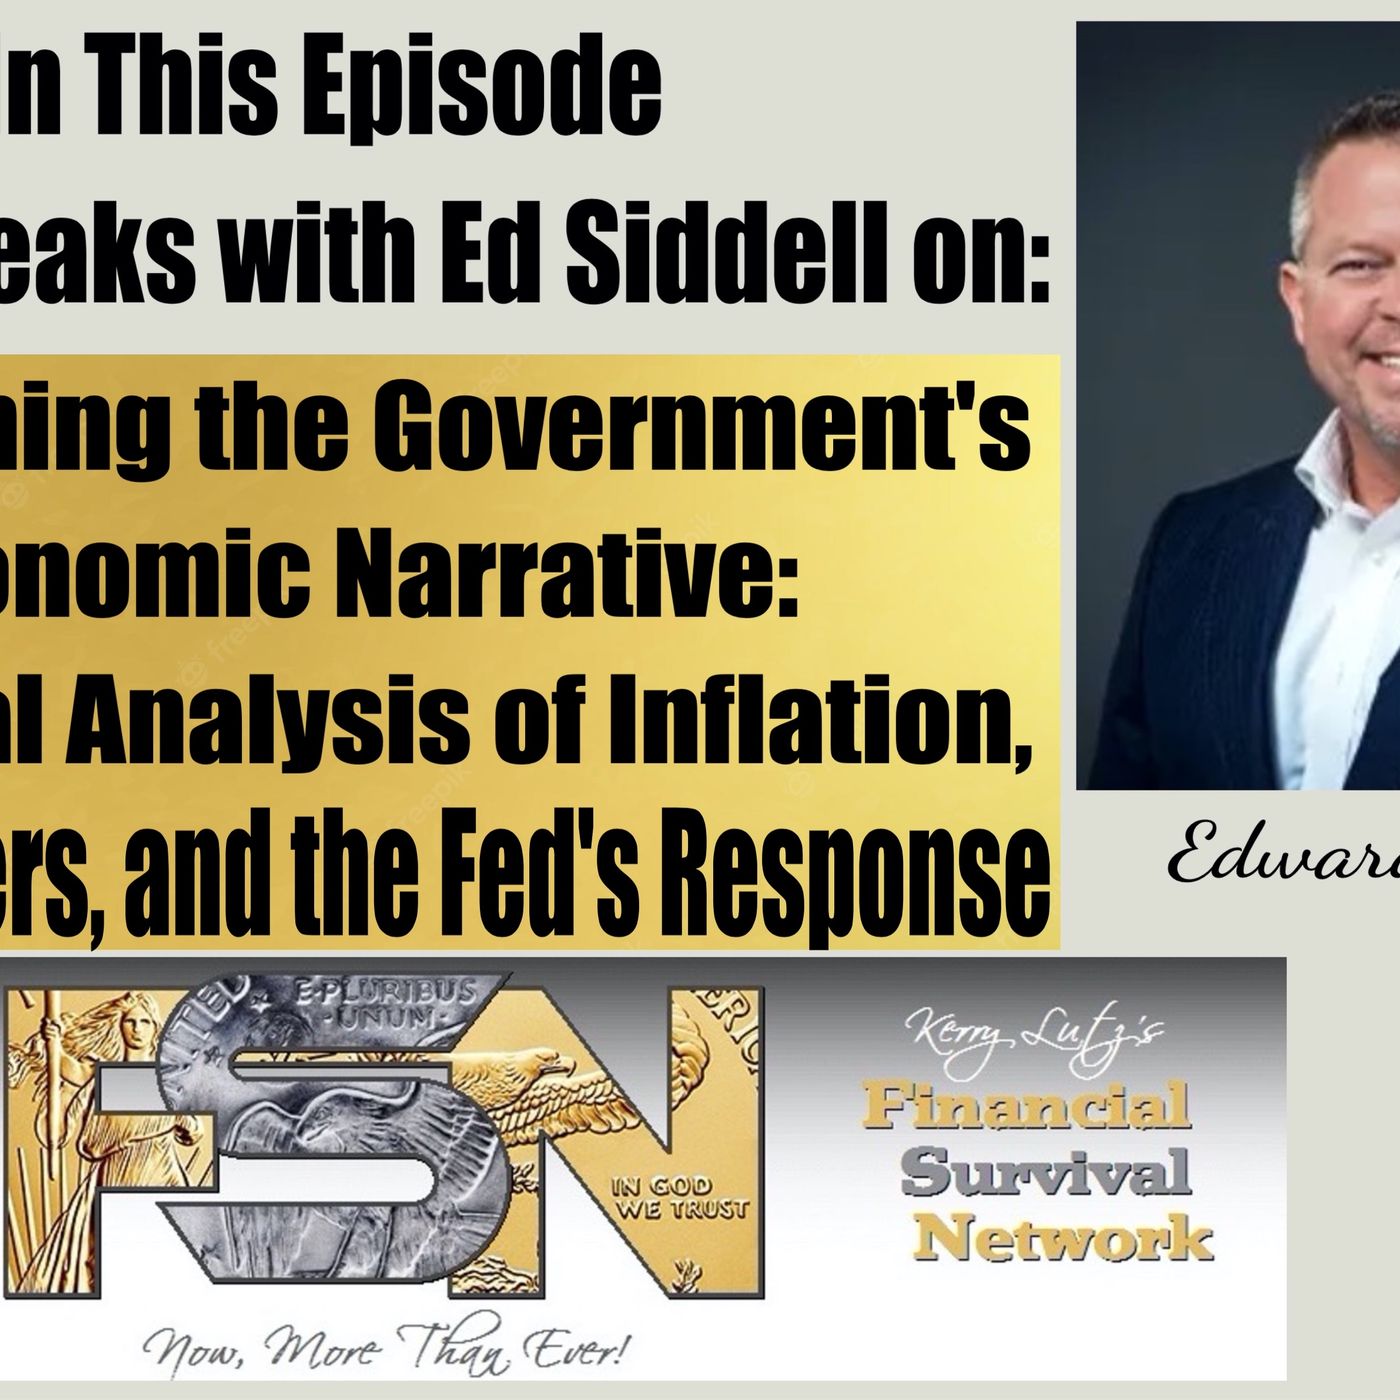 Questioning the Government’s Economic Narrative: A Critical Analysis of Inflation, PPI Numbers, and the Federal Reserve’s Response - Ed Sidd